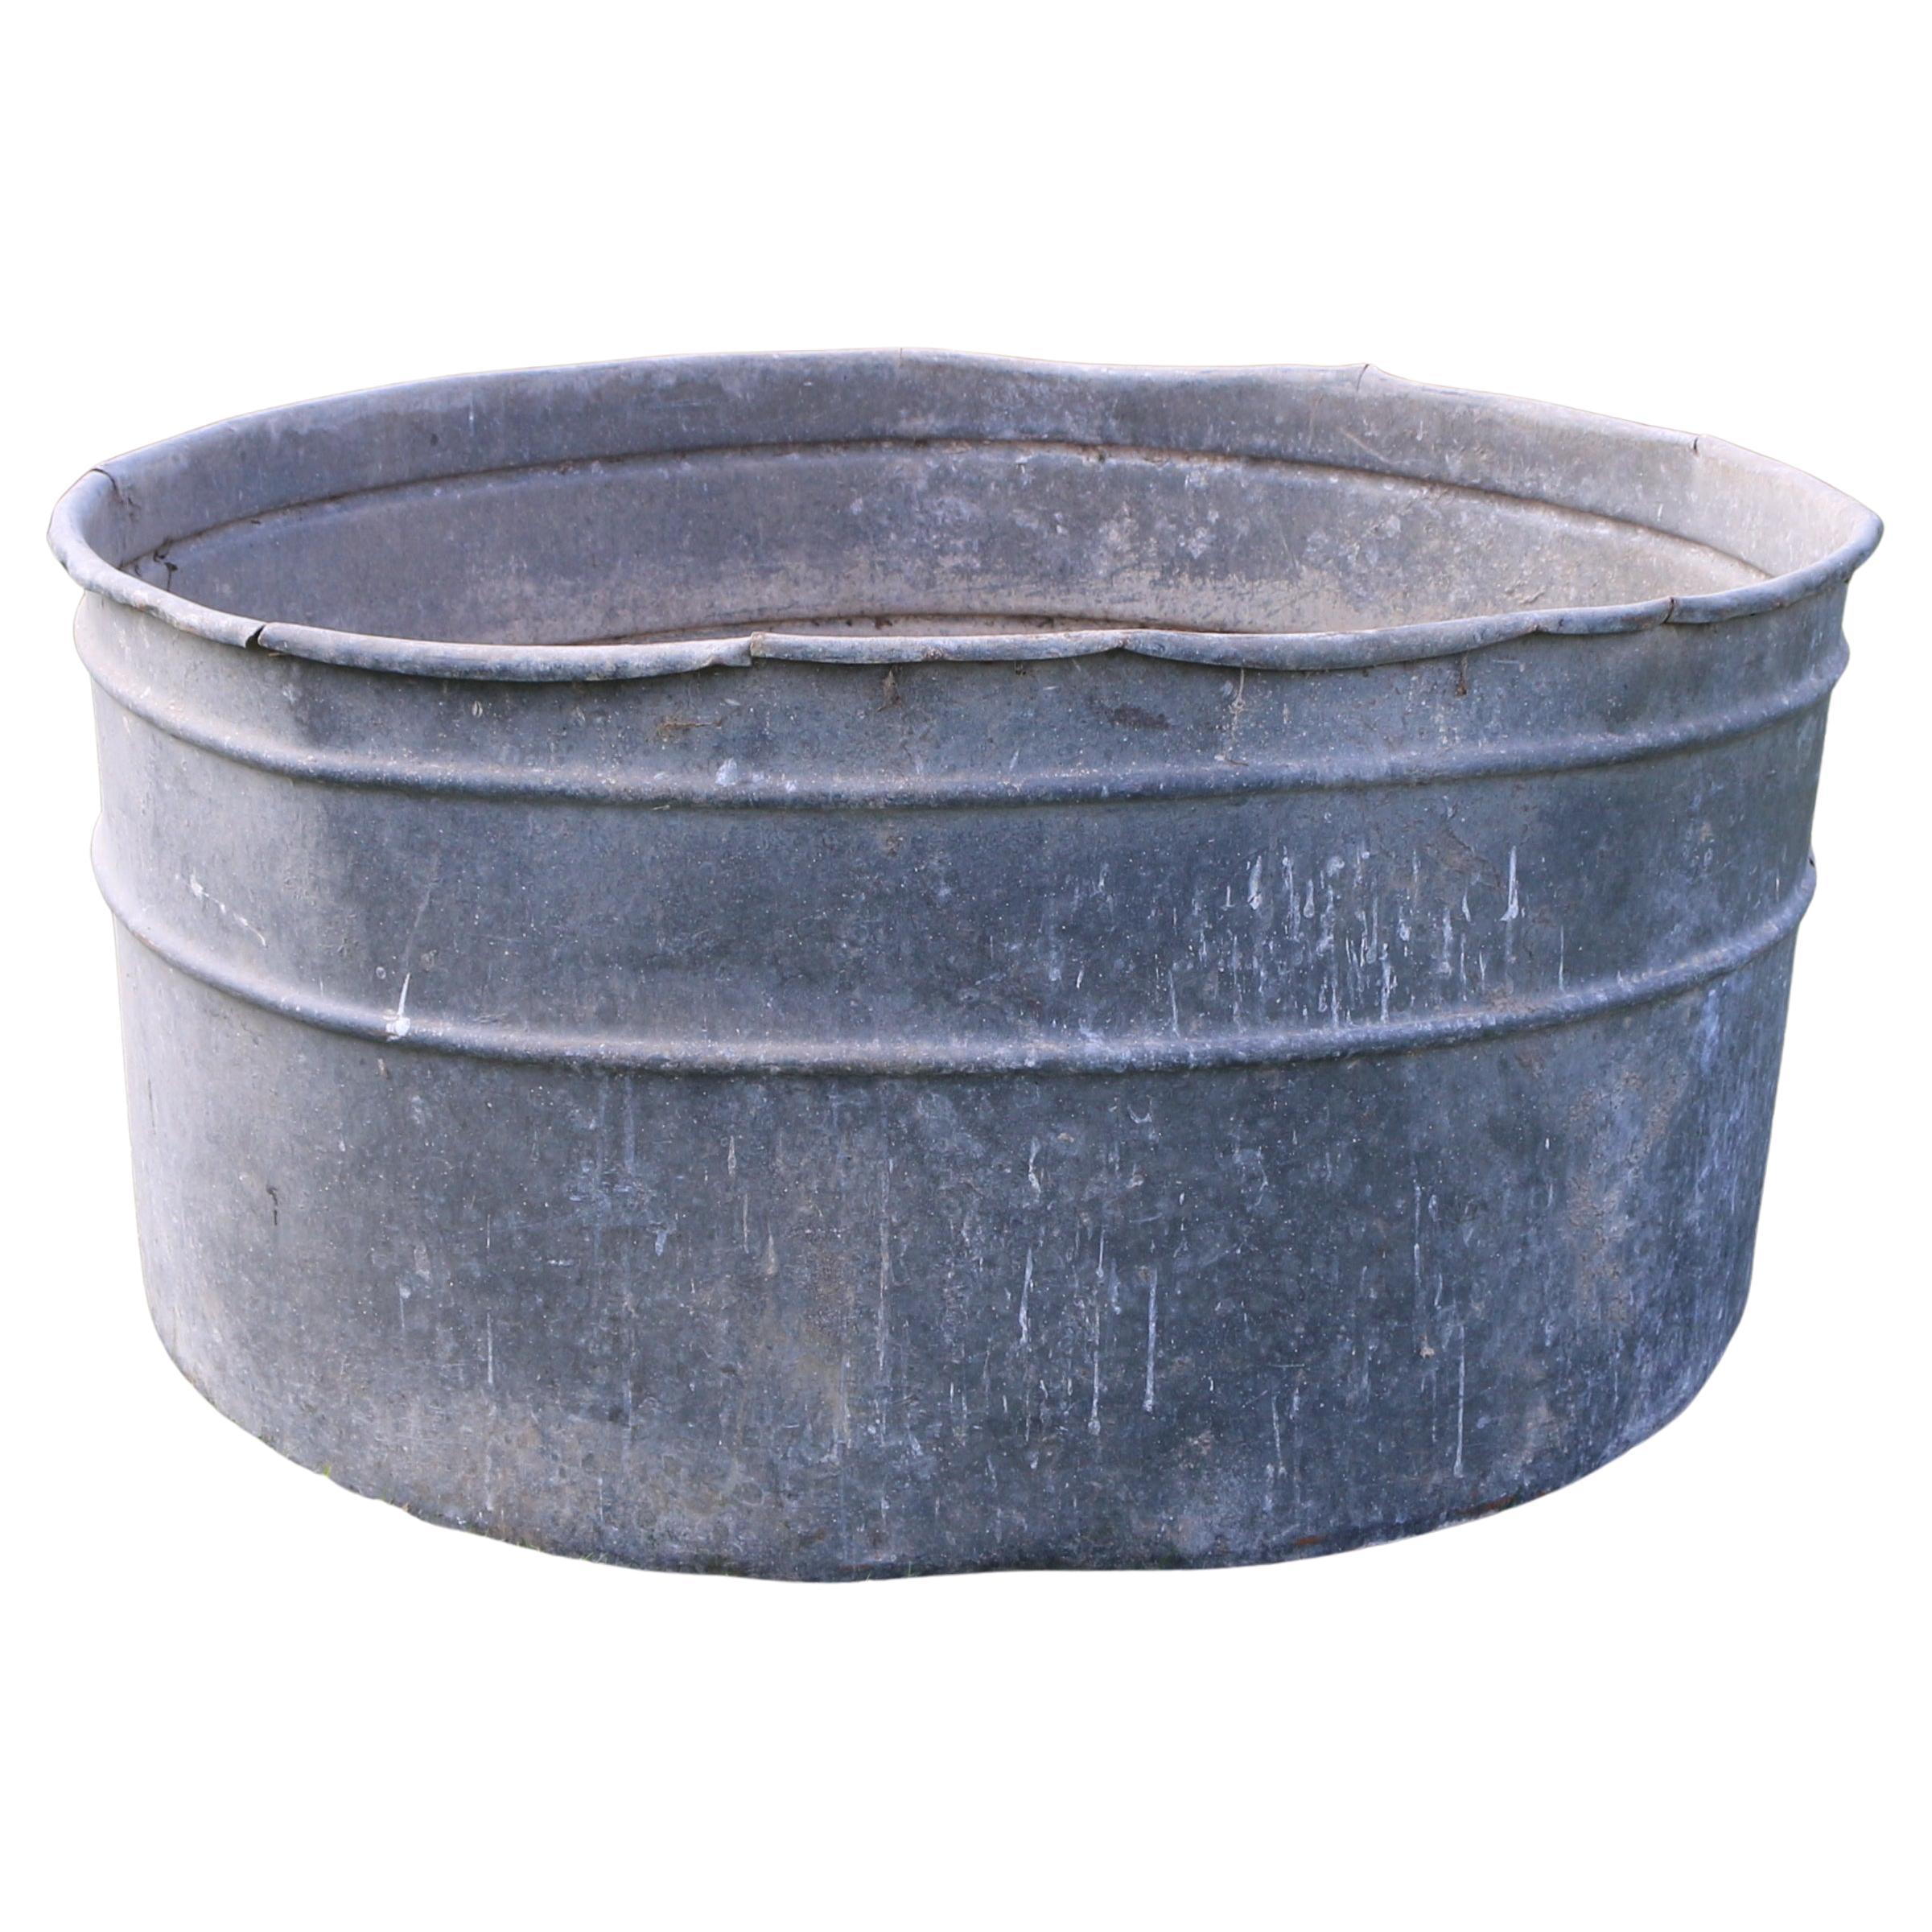 Large Galvanised Planter For Sale